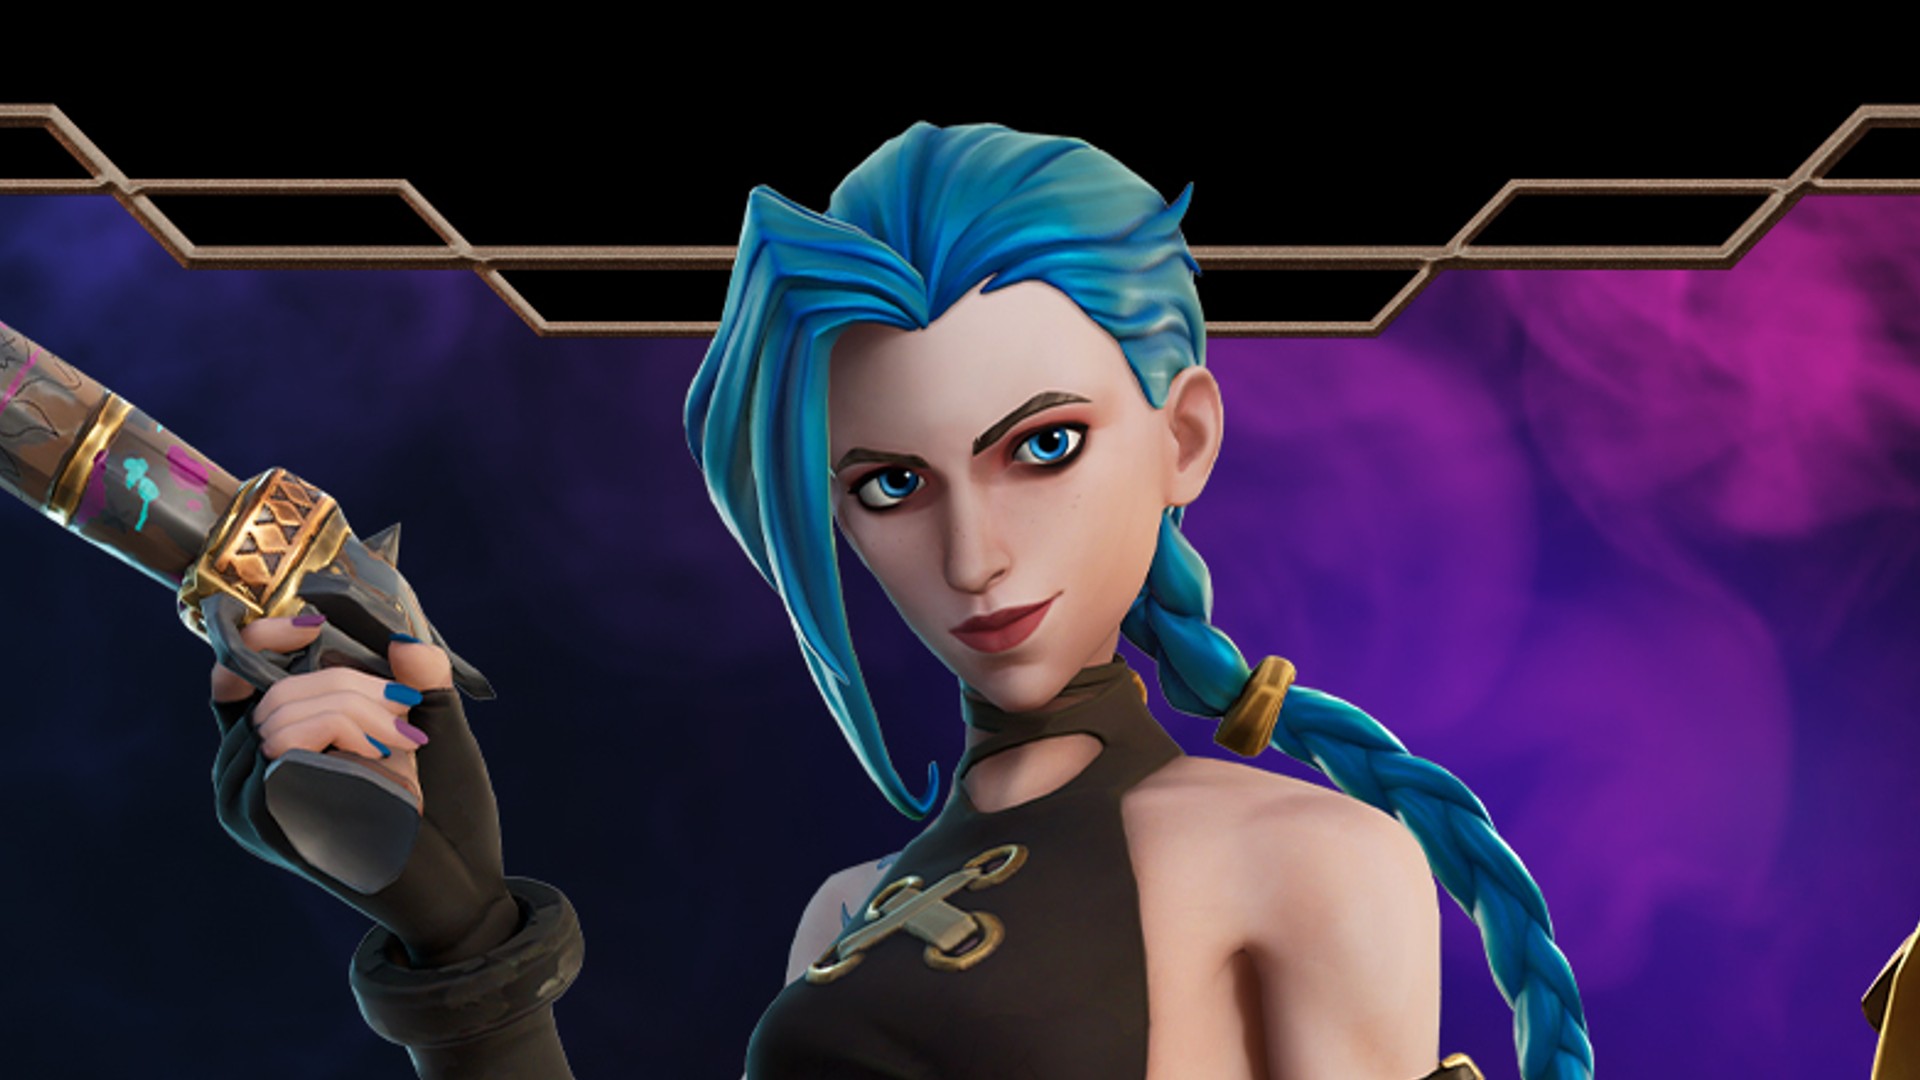 League of Legends' Jinx joins Fortnite ahead of Netflix's animated TV show